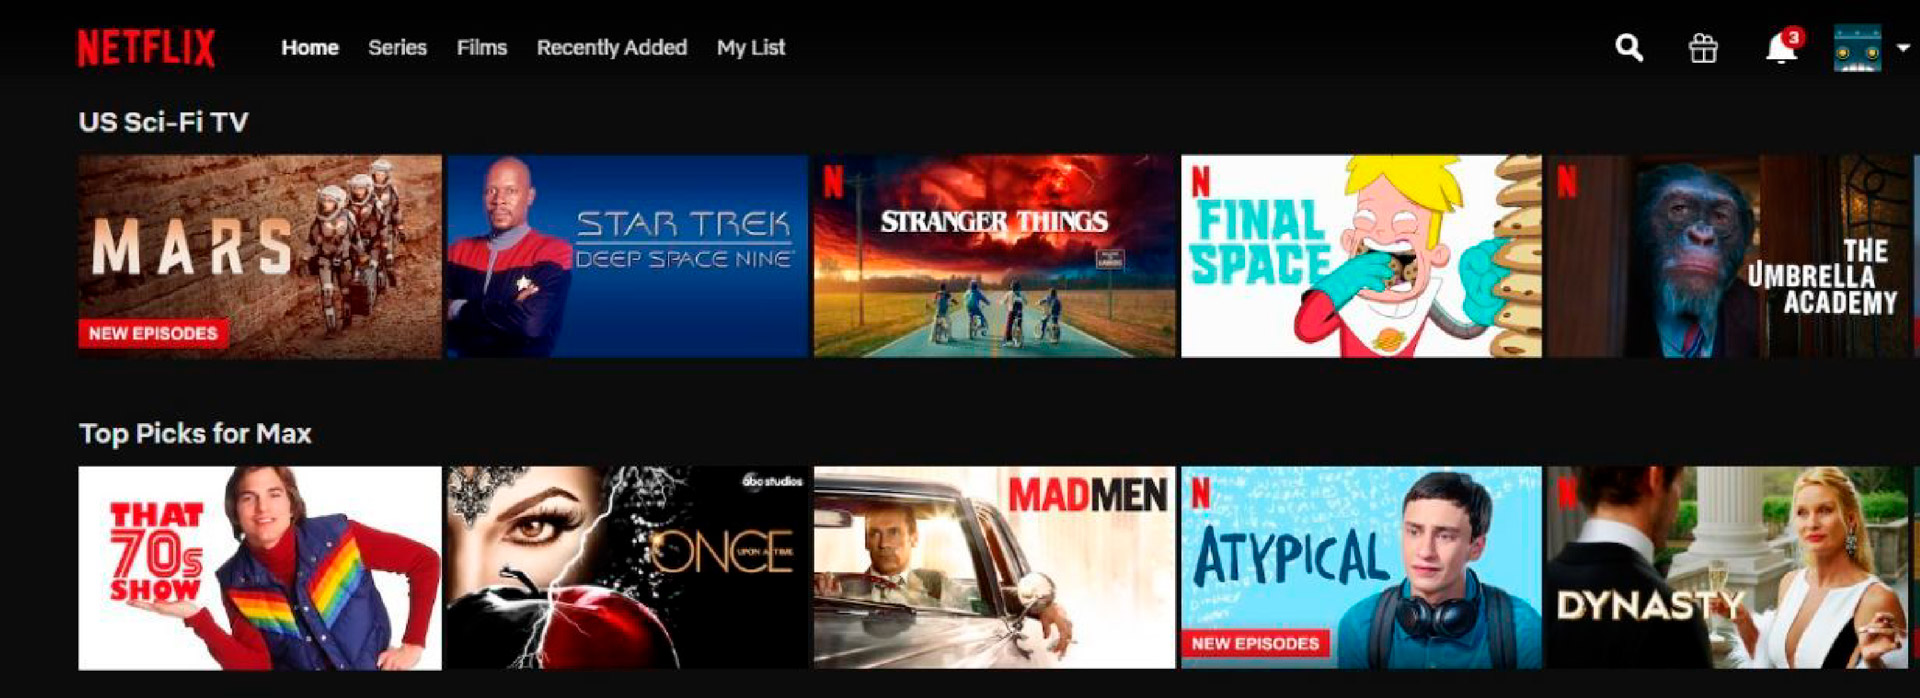 Artificial Intelligence examples in real world - Netflix Recommendation Engine